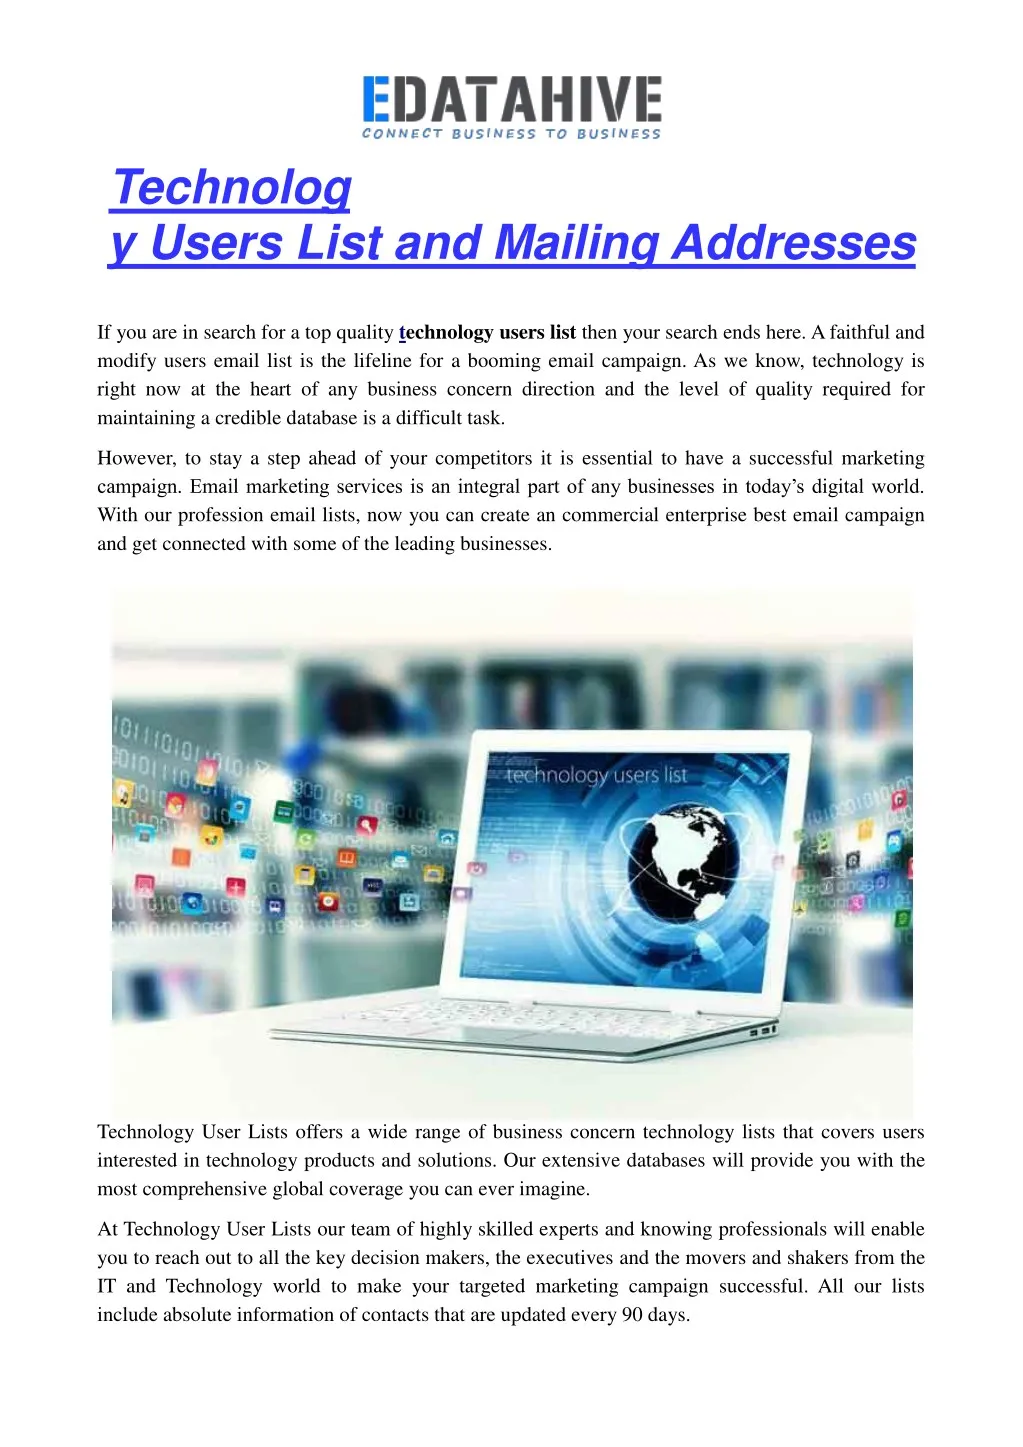 technolog y users list and mailing addresses